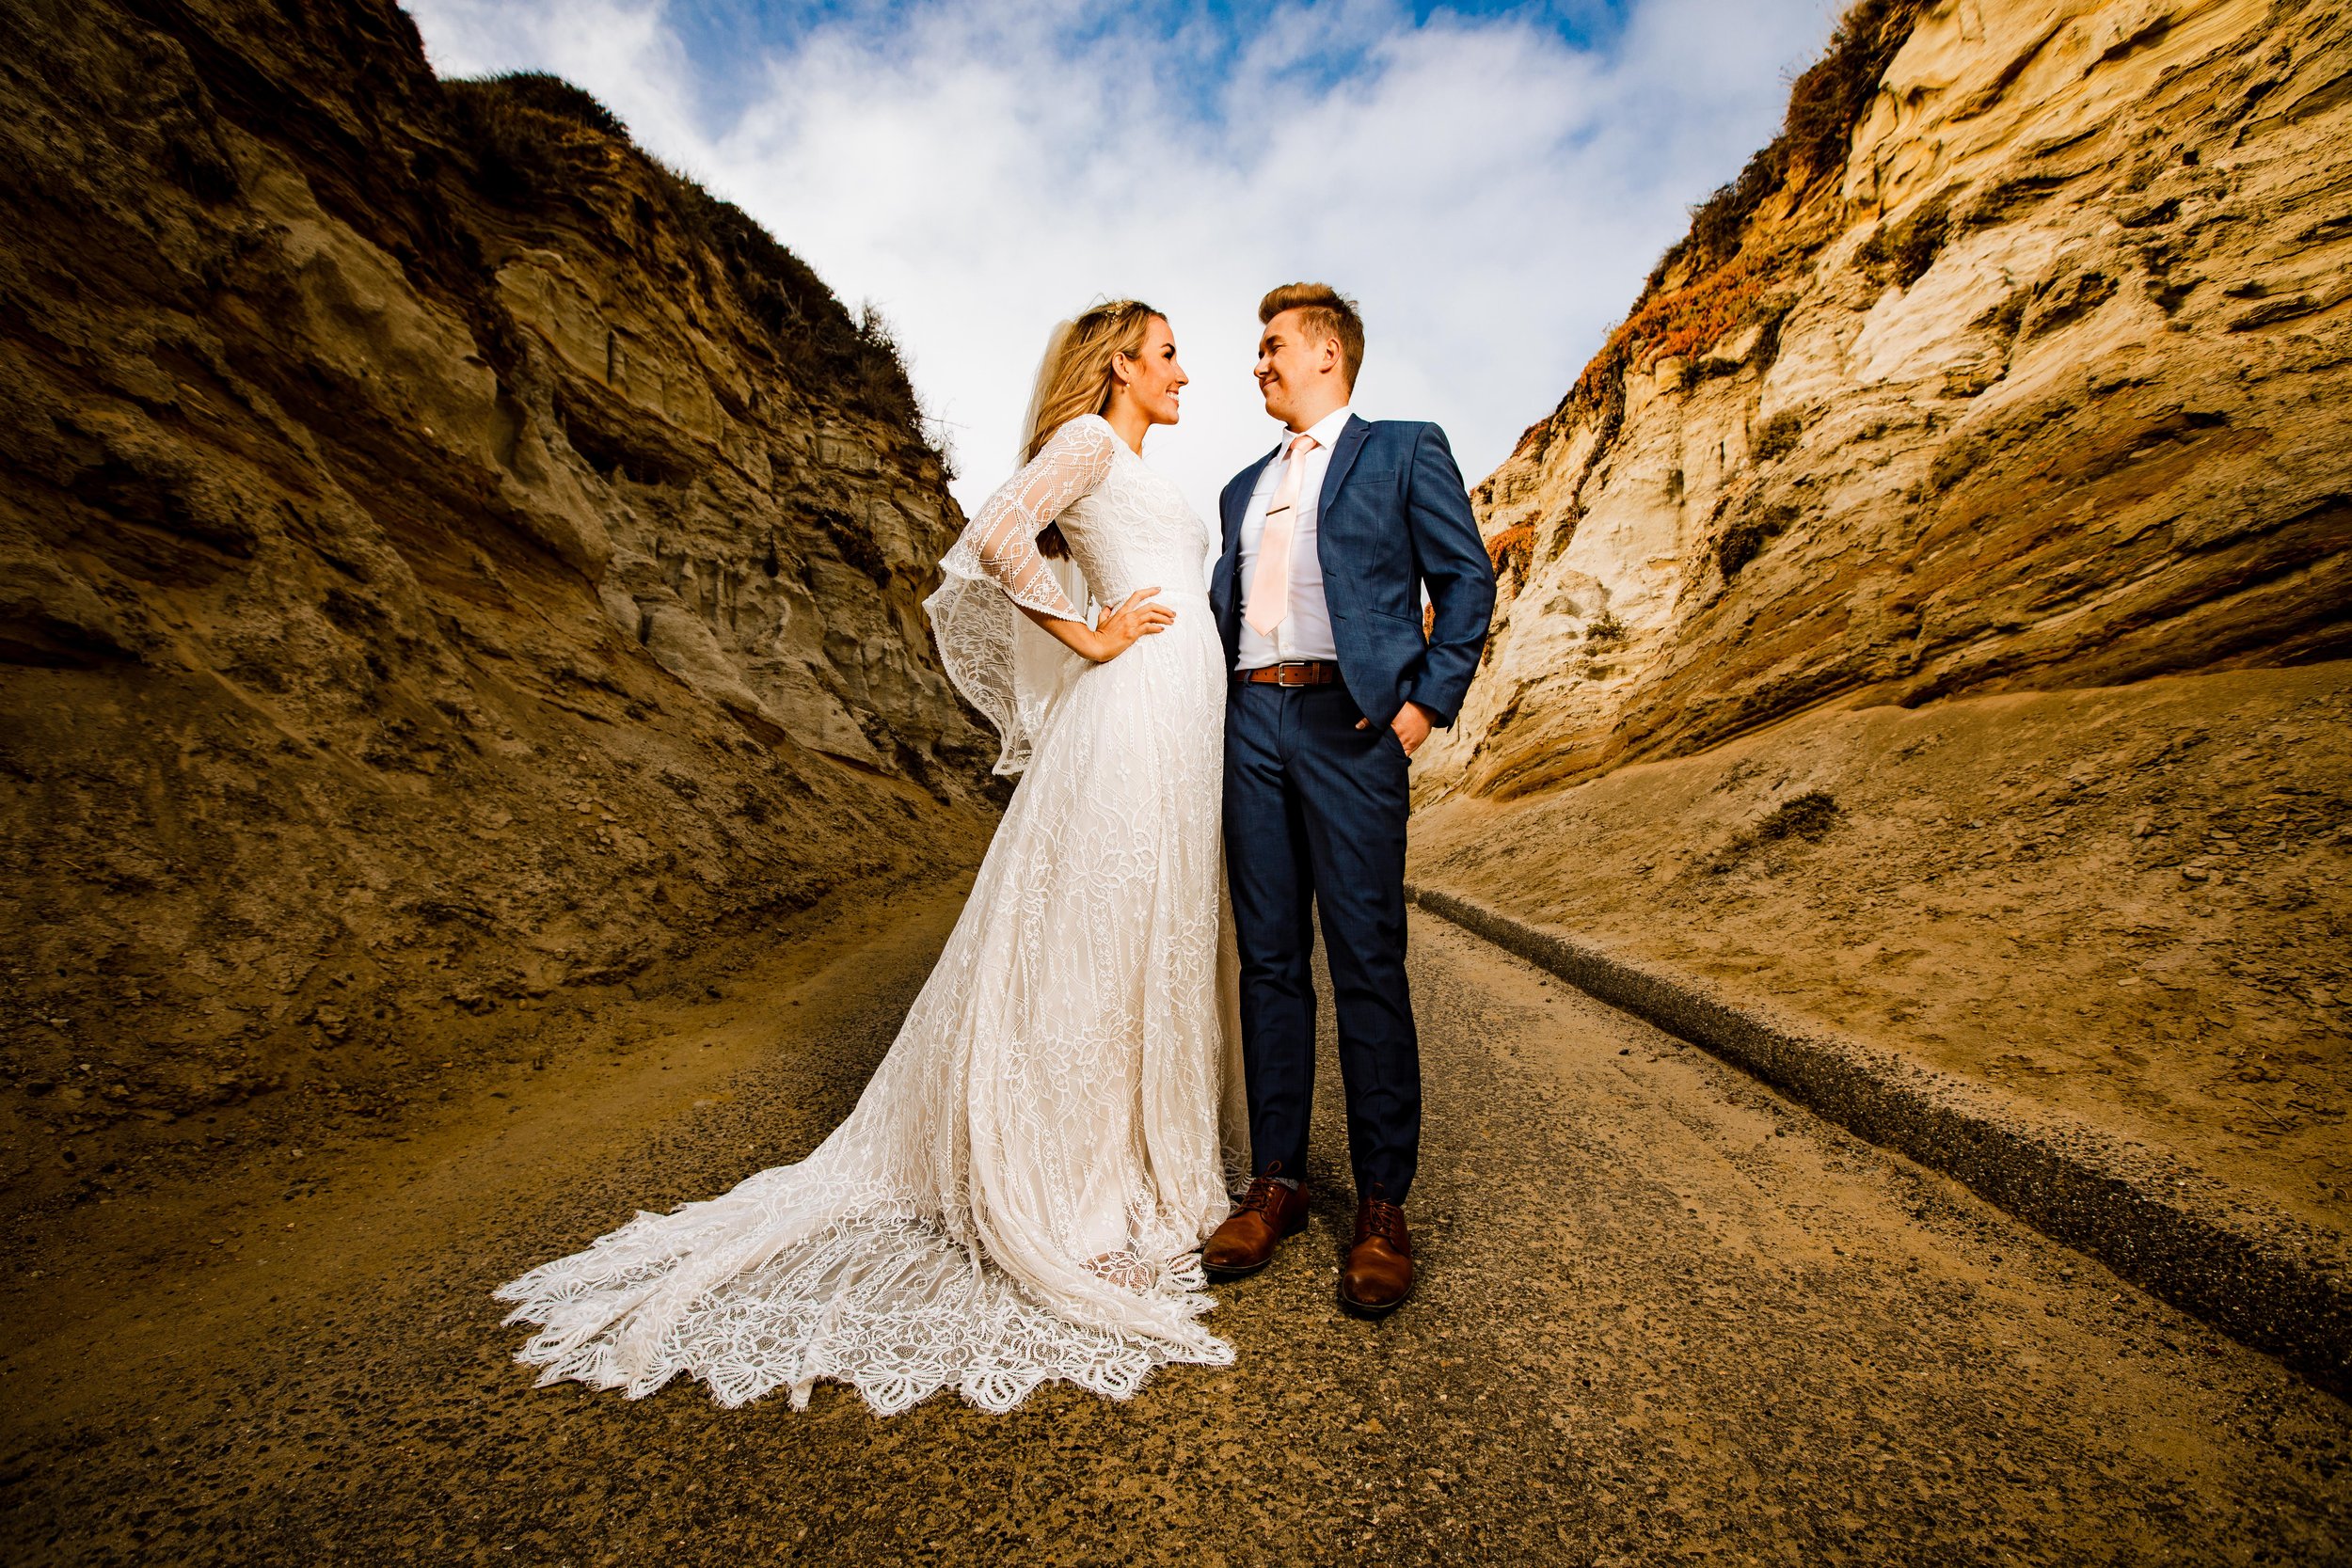 Cinematic Bride and Groom Portrait at San Clemente State Beach on their wedding day.